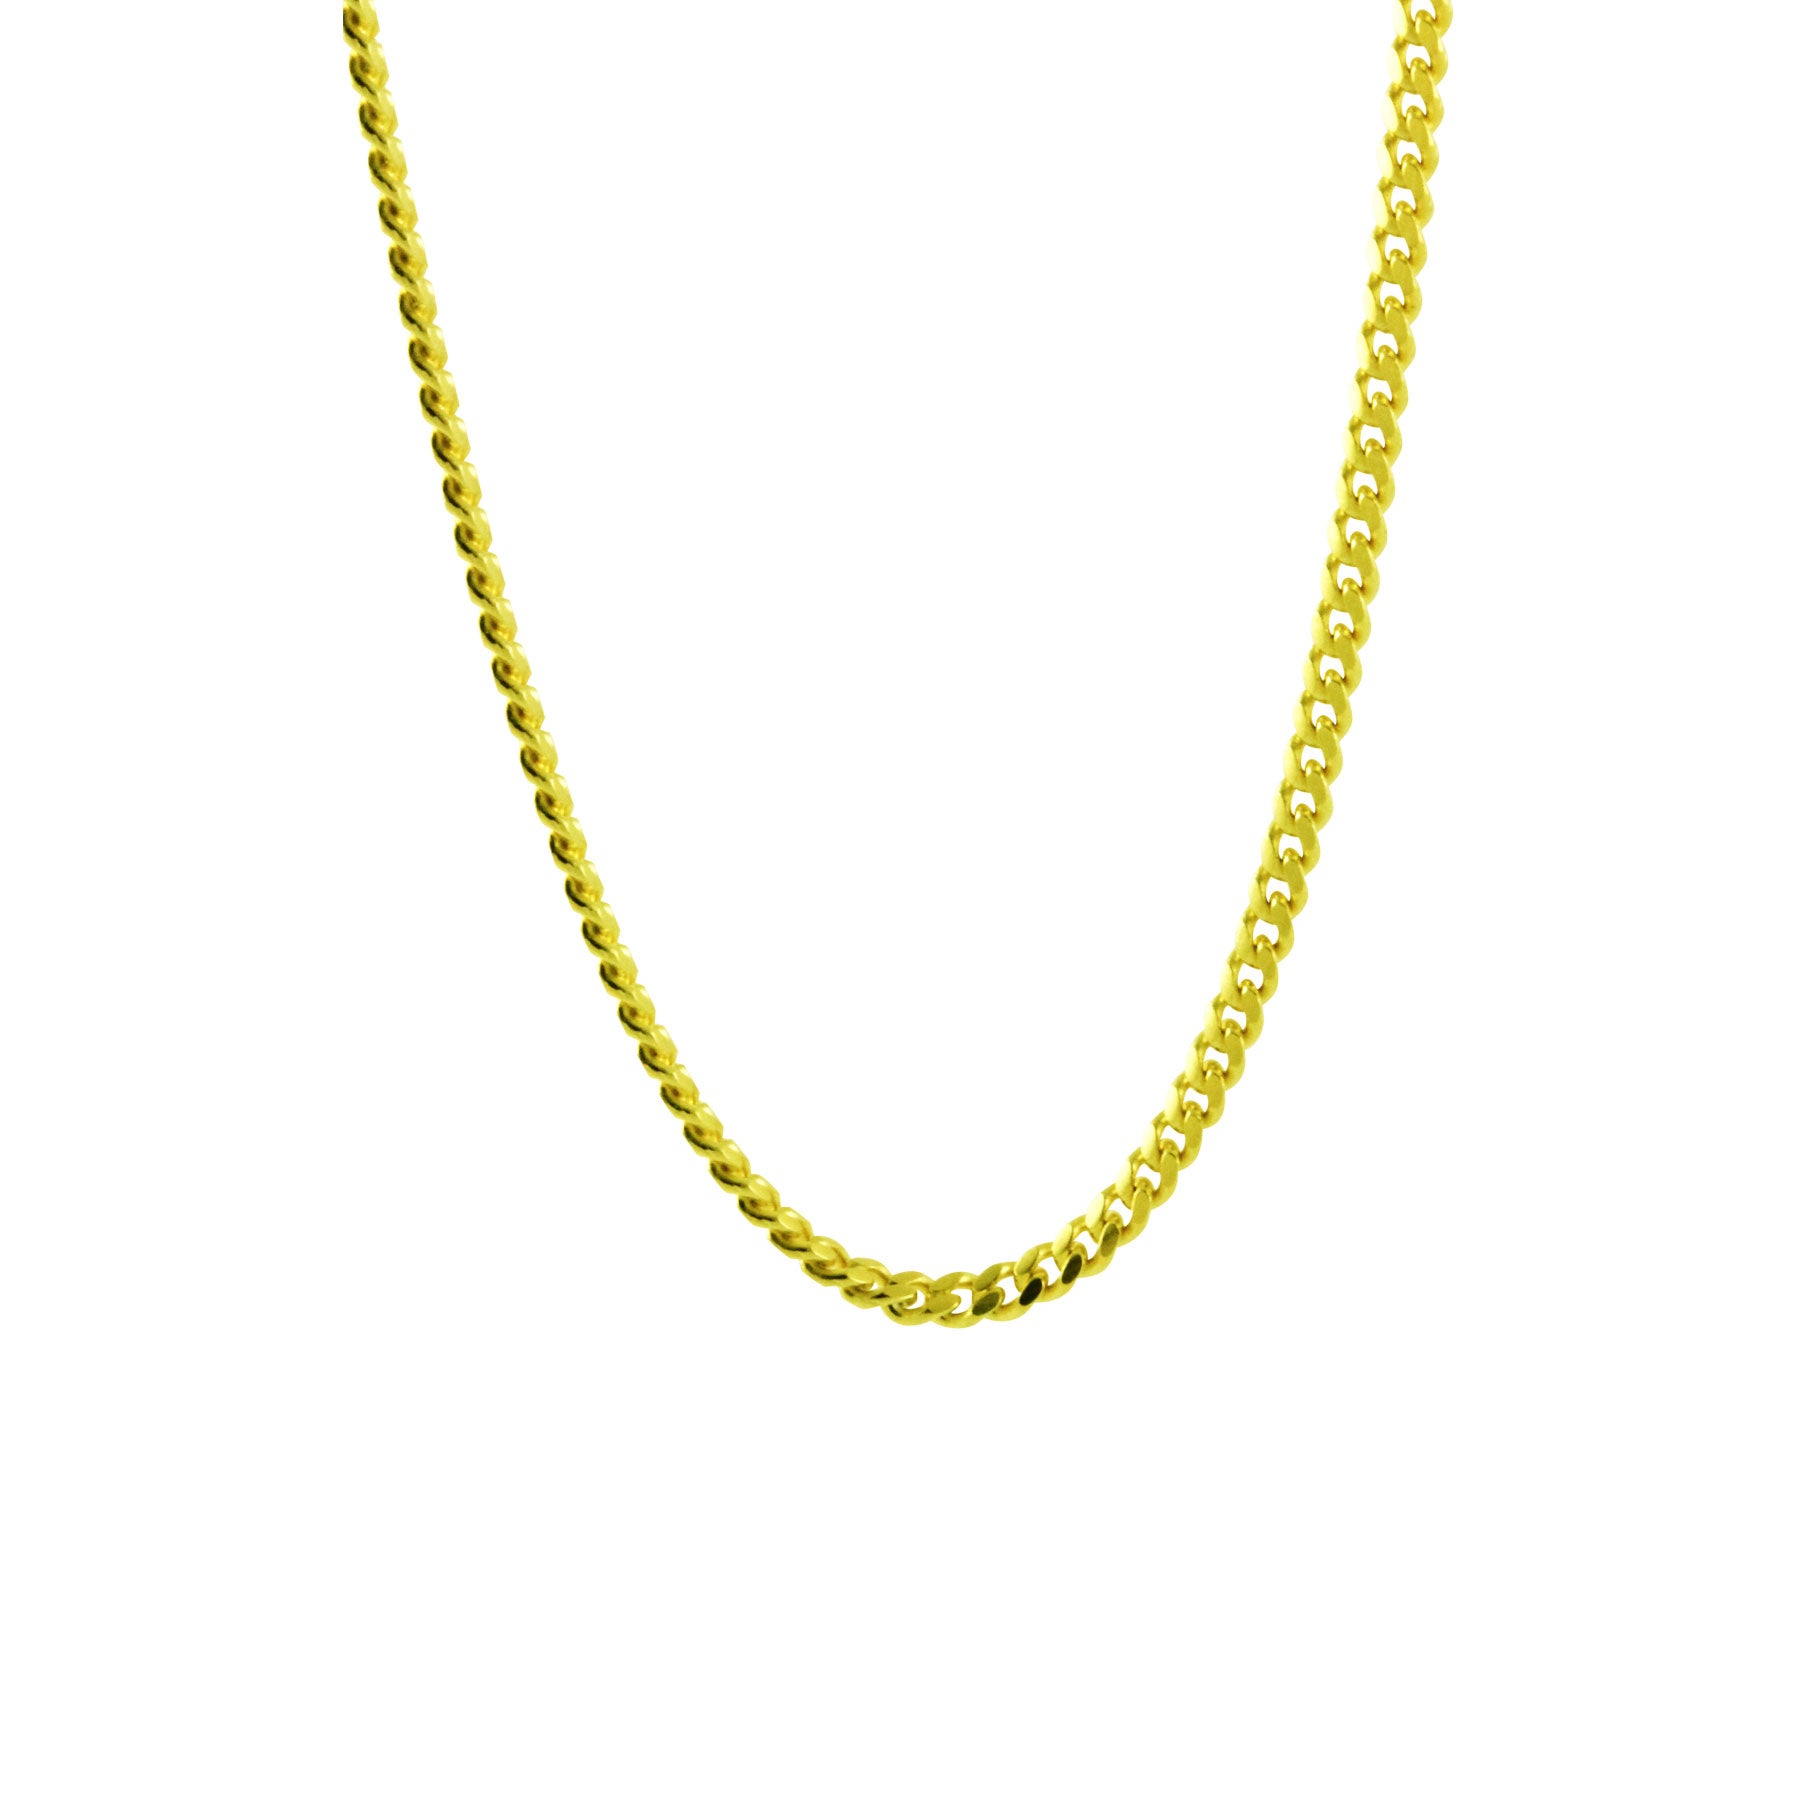 Gold-Dipped Miami Style Links Chain Necklace